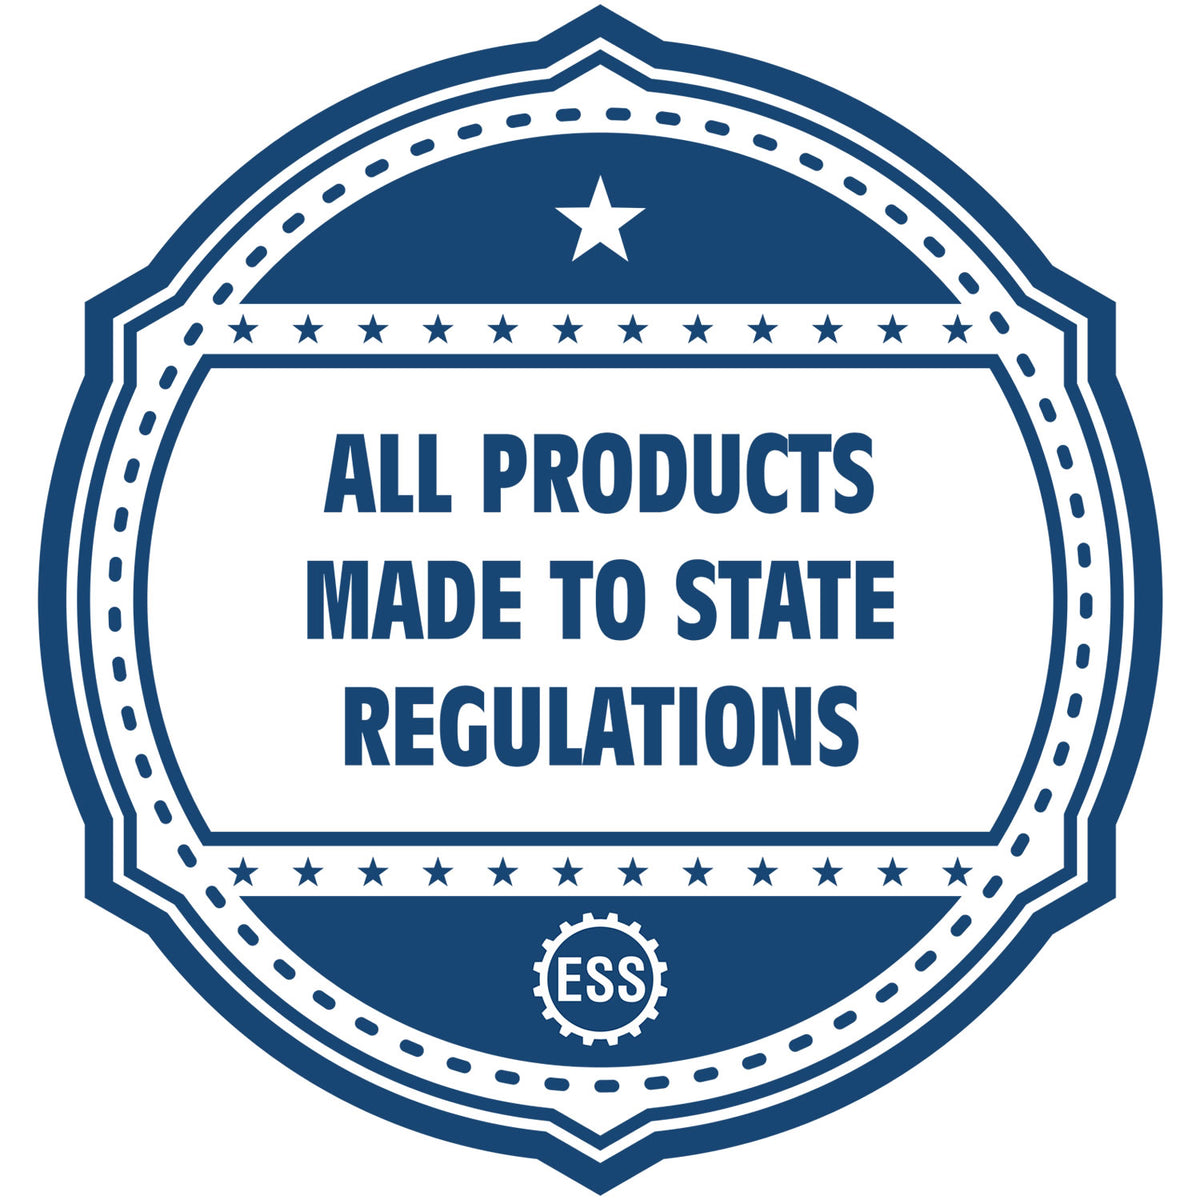 An icon or badge element for the Self-Inking North Carolina Landscape Architect Stamp showing that this product is made in compliance with state regulations.